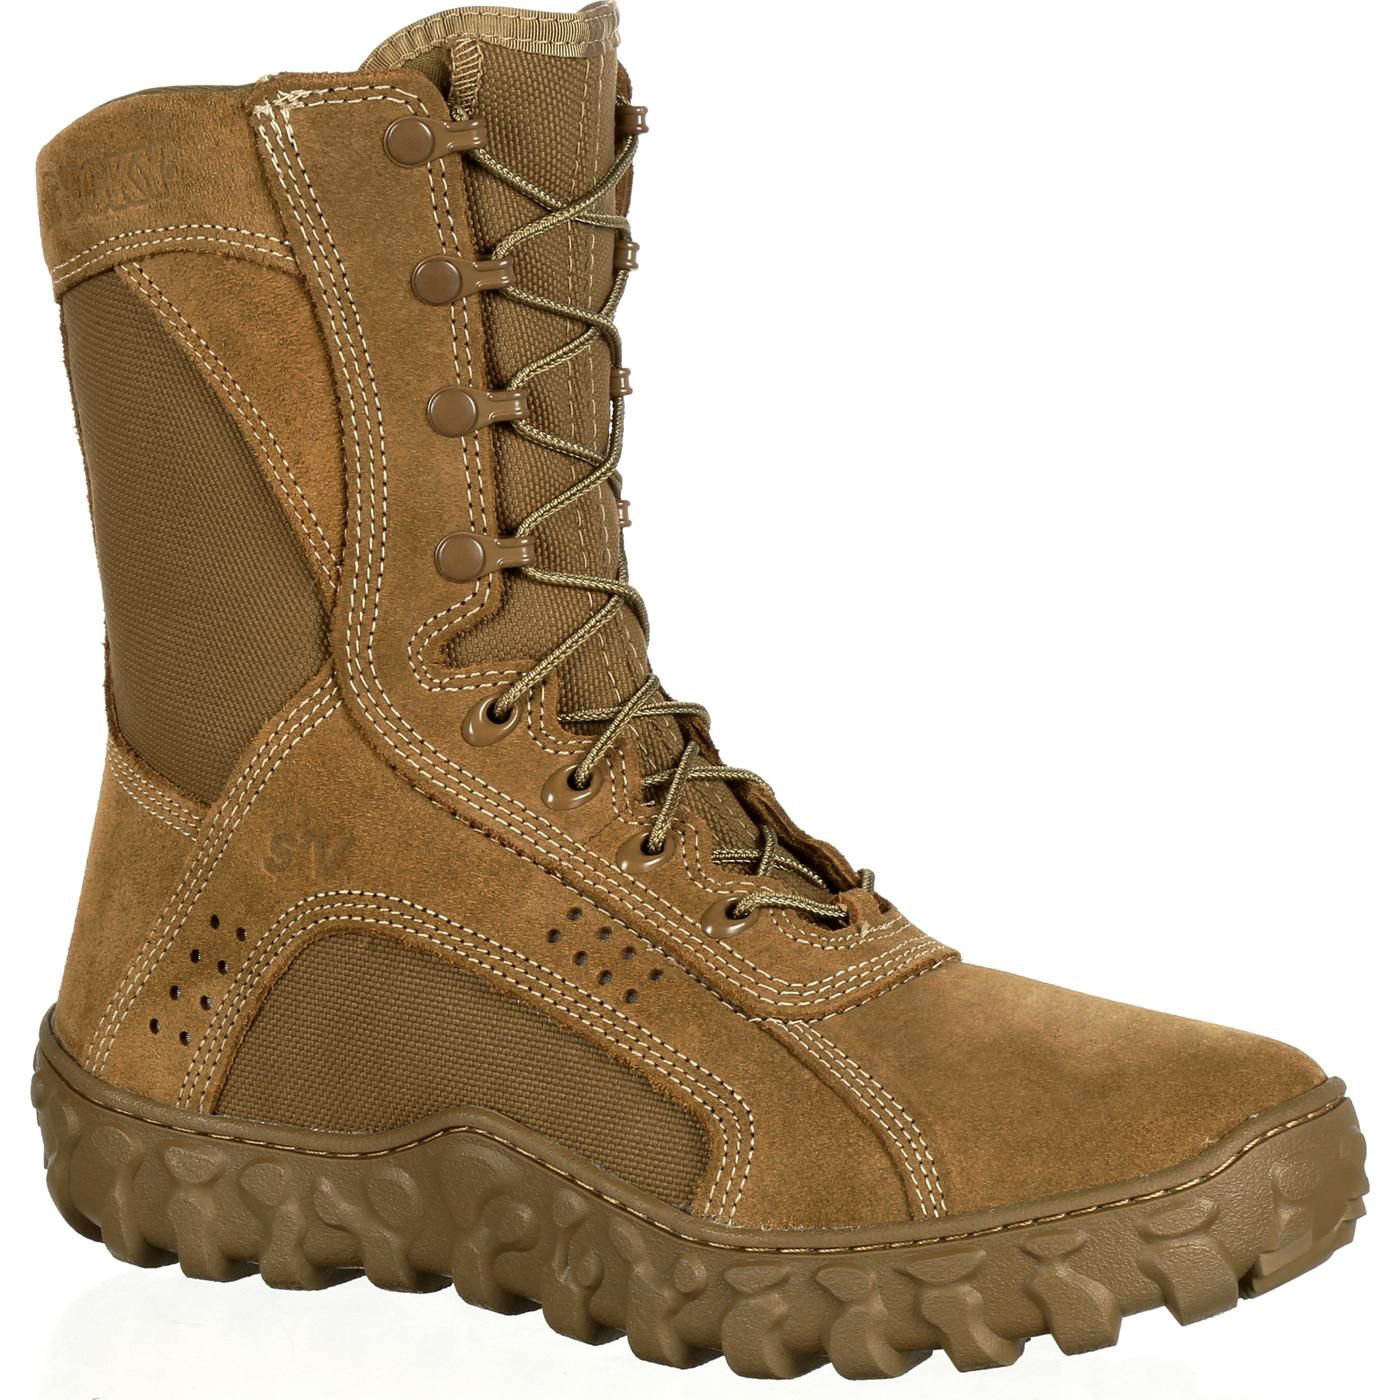 Rocky S2V Tactical Military Boots for Men - Coyote Brown - 9.5W